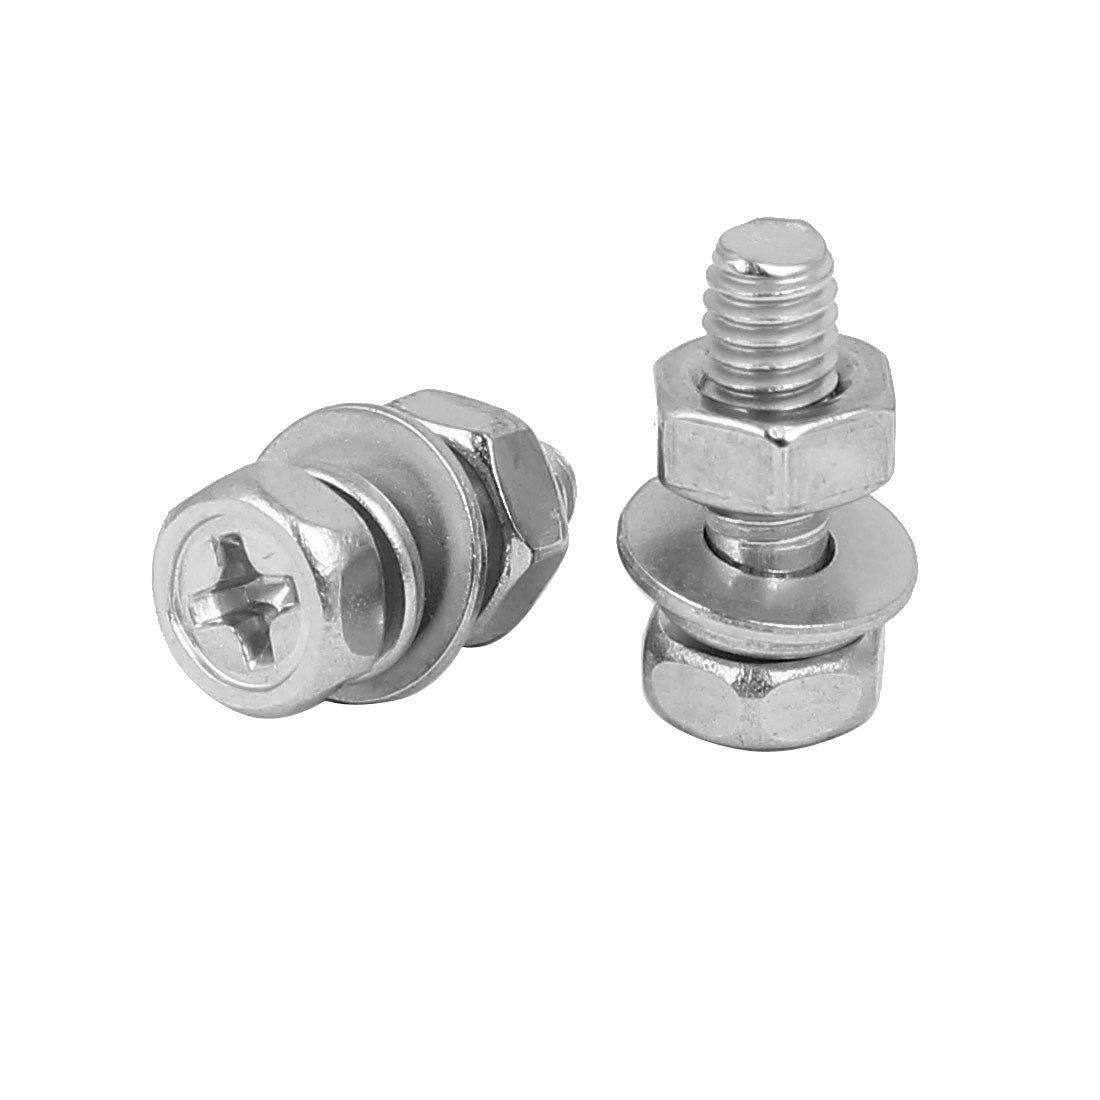 uxcell Uxcell M4 x 12mm 304 Stainless Steel Phillips Hex Head Bolts Nuts w Washers 15 Sets